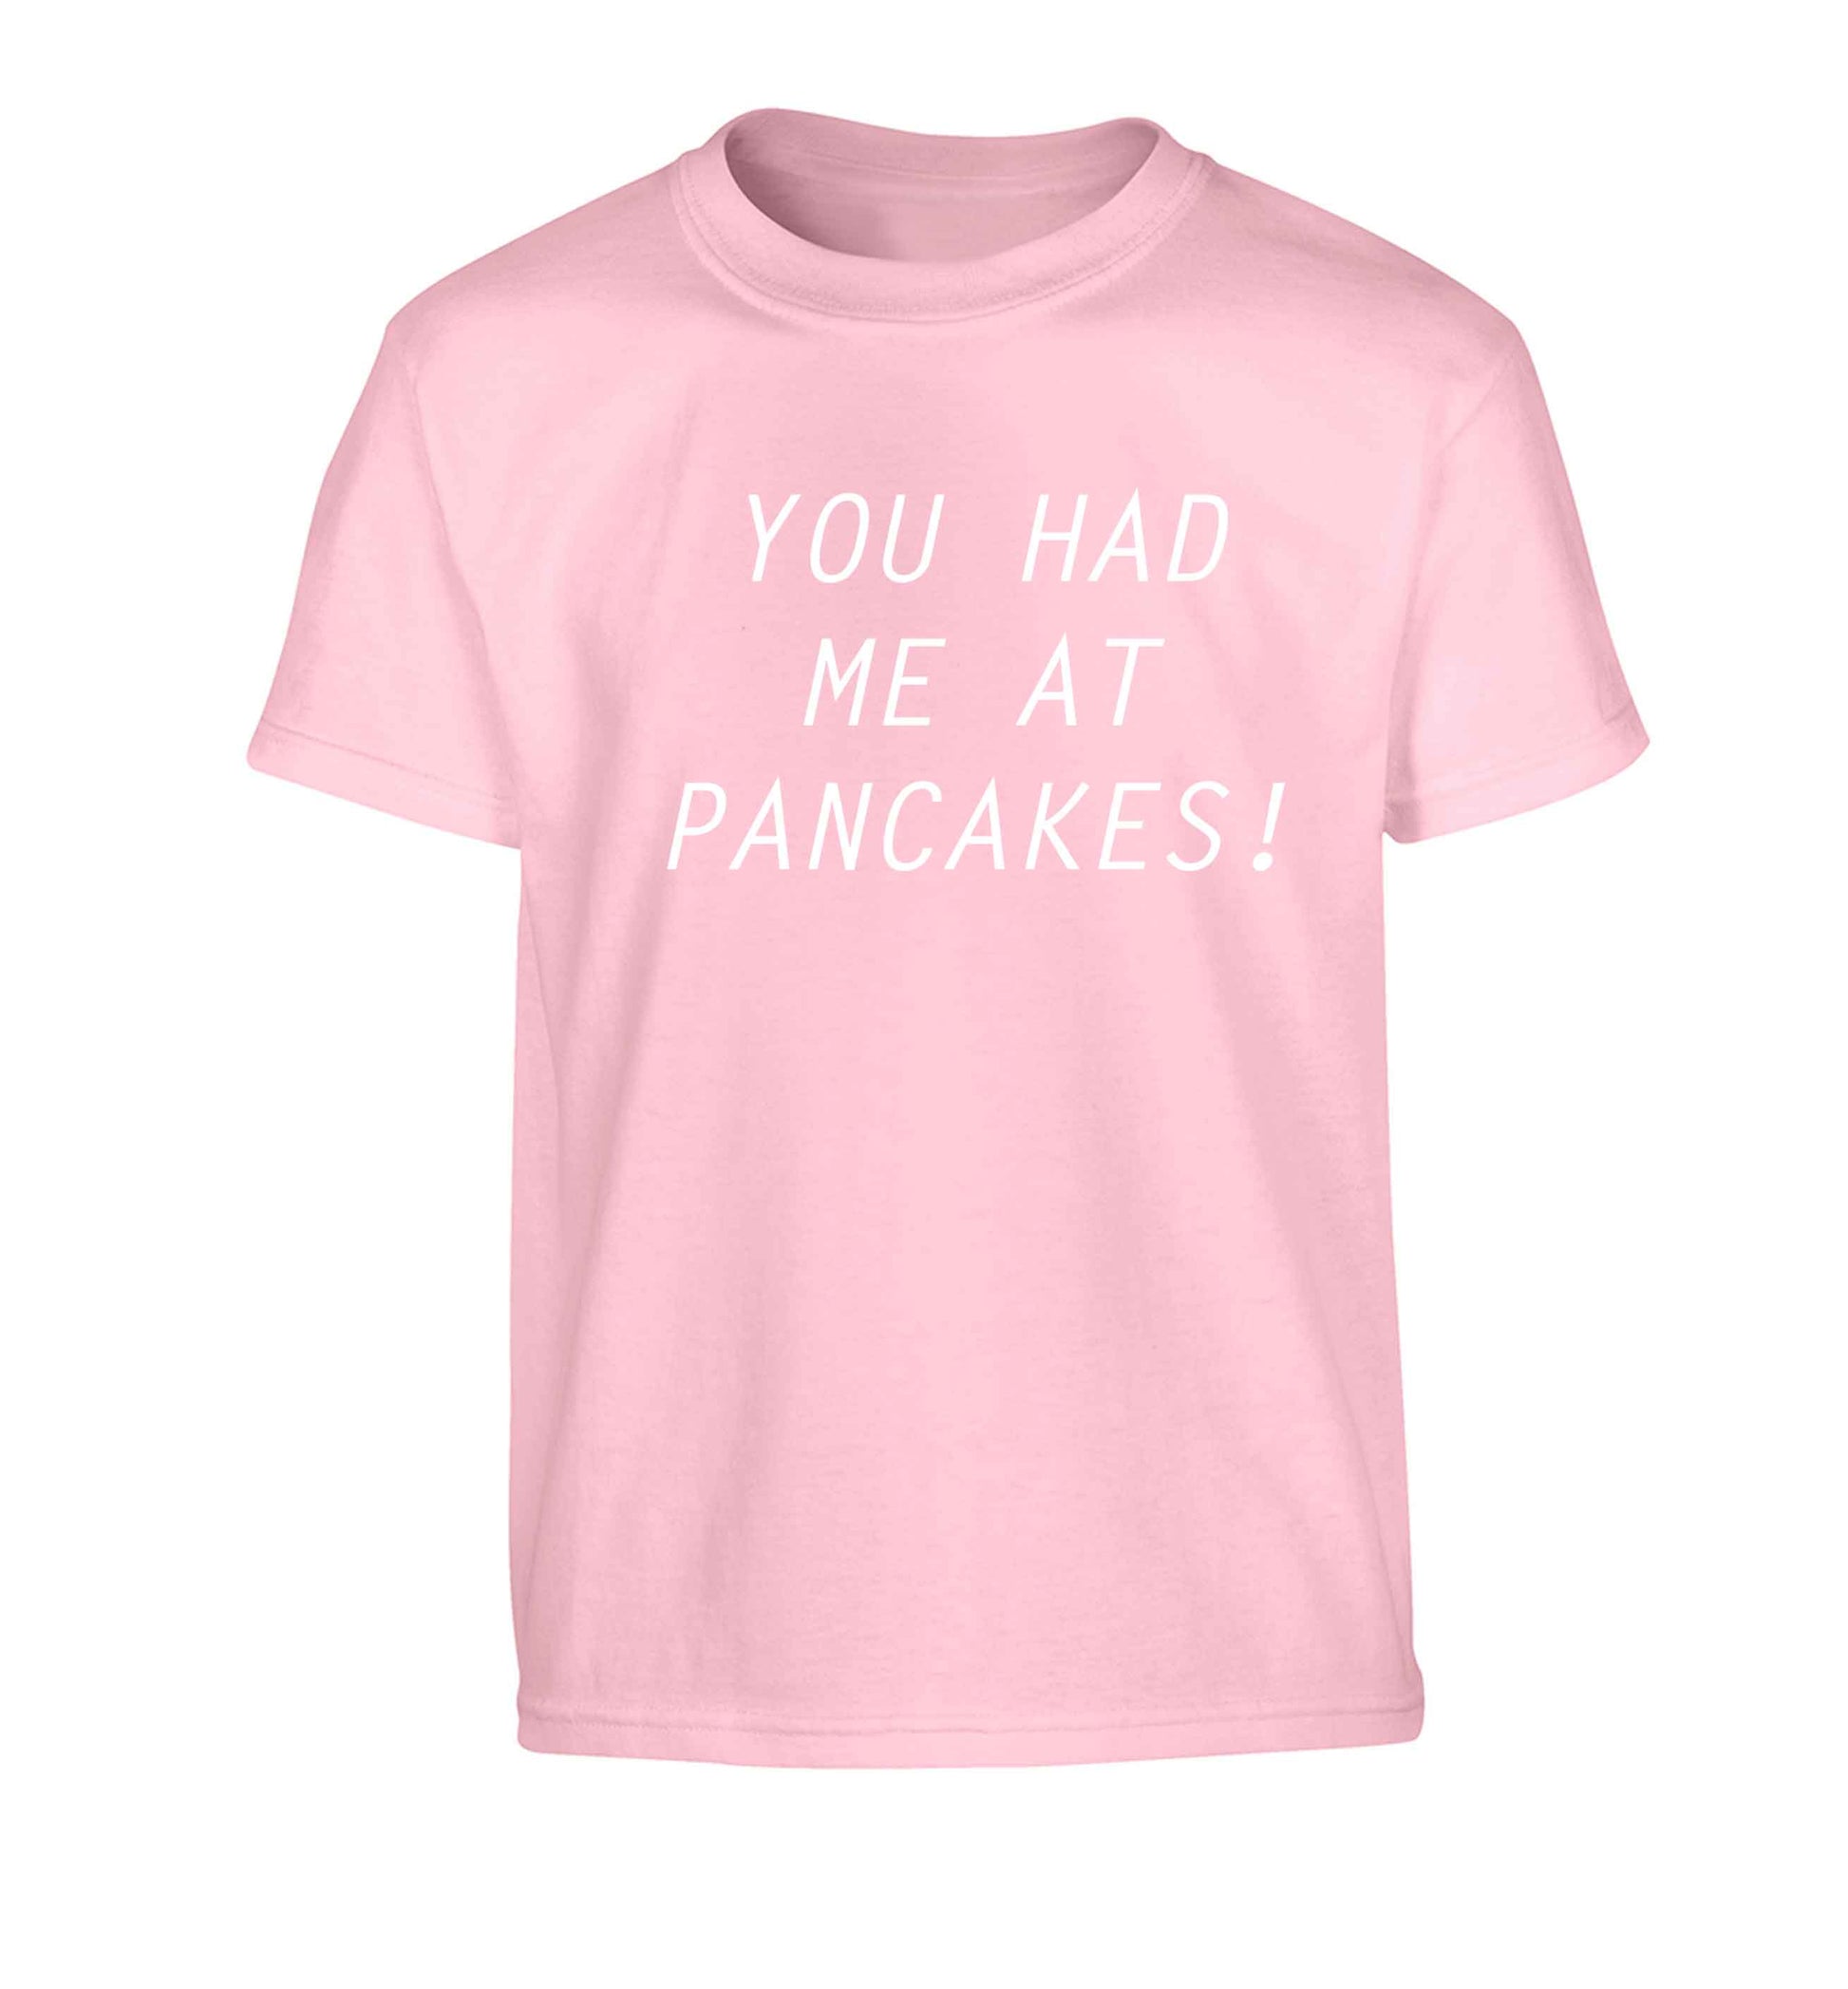 You had me at pancakes Children's light pink Tshirt 12-13 Years